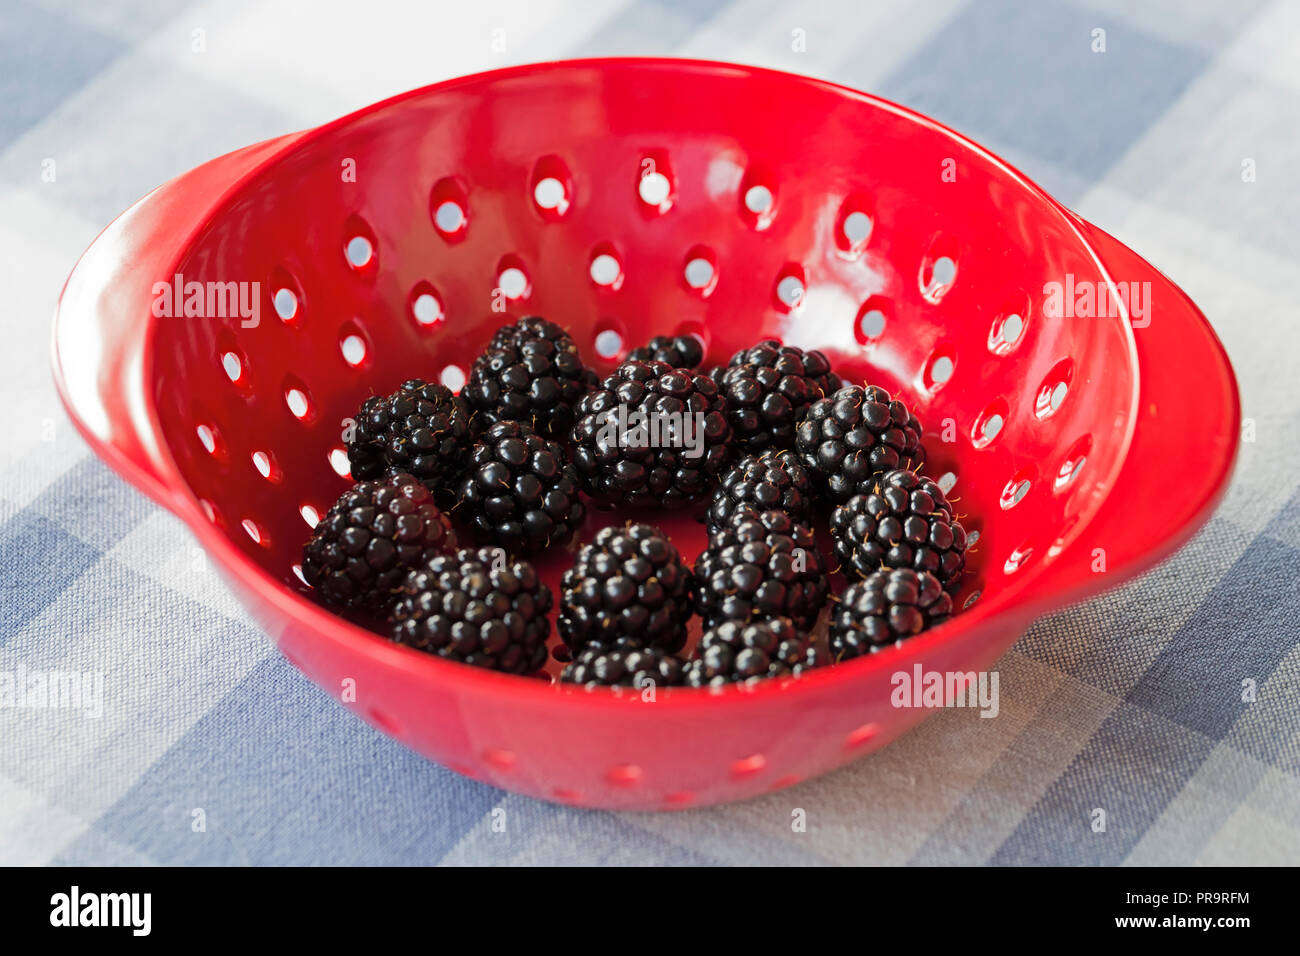 Ripe blackberries in a red dish Stock Photo